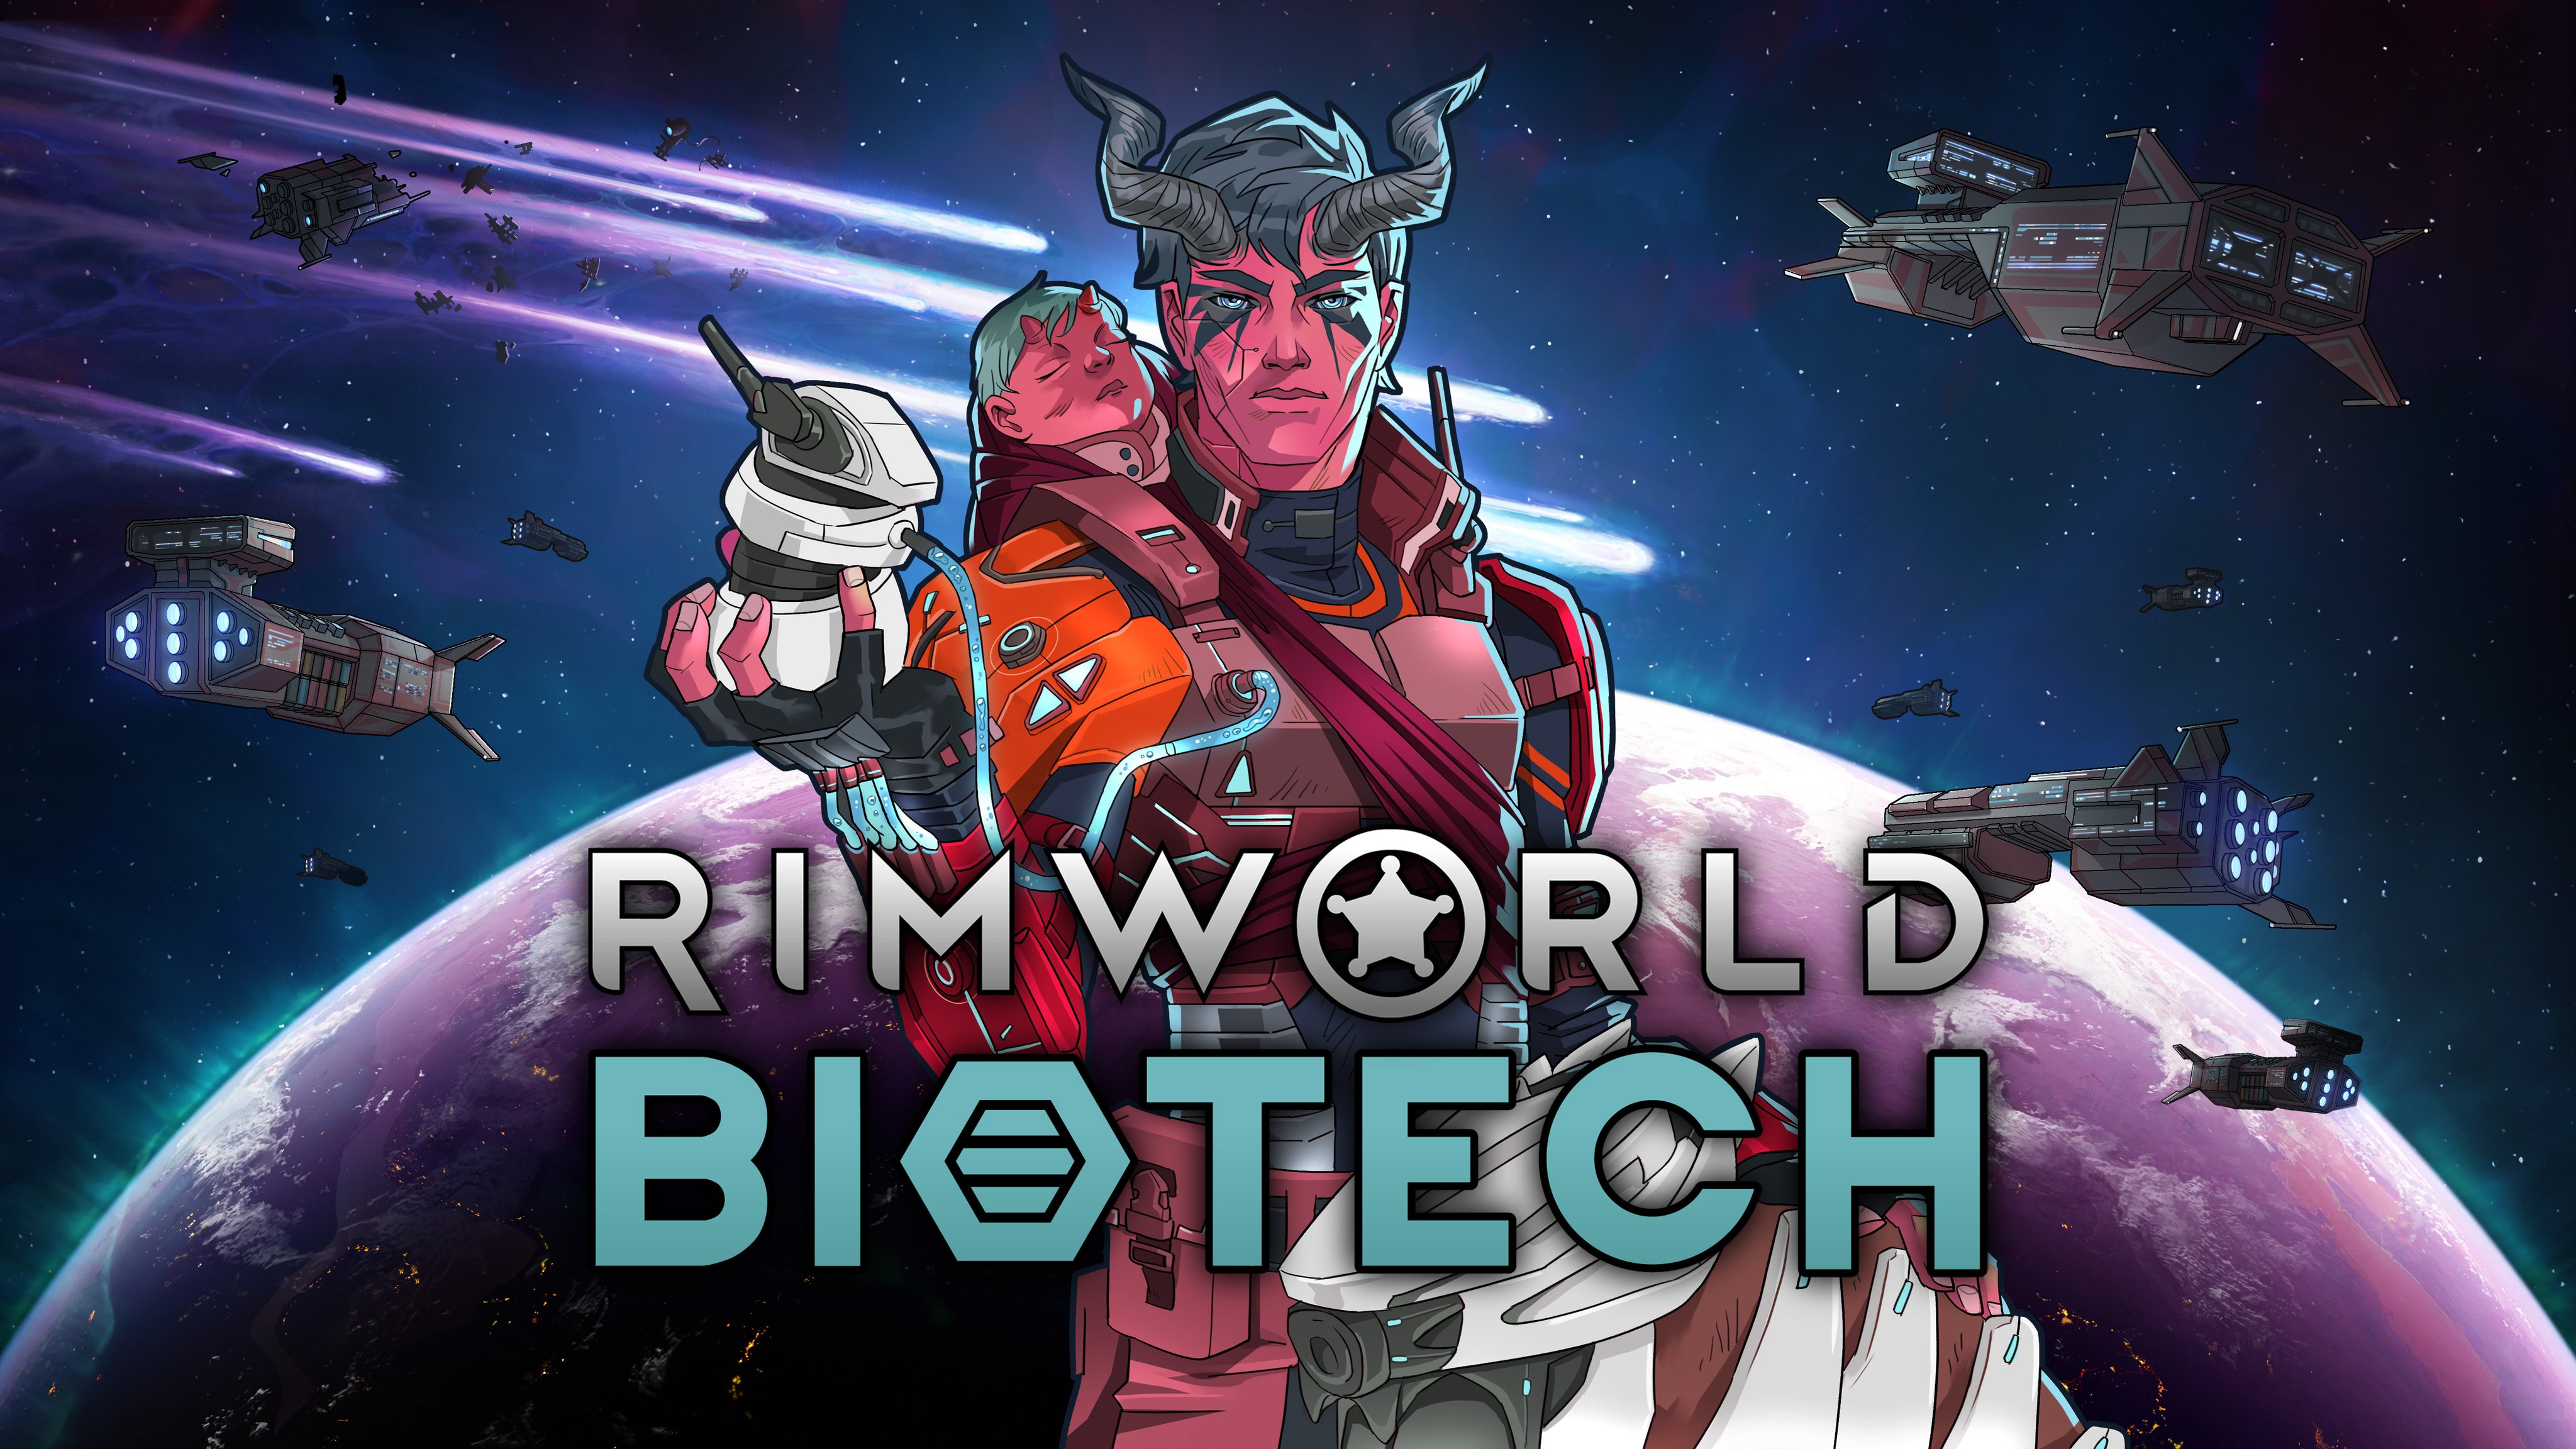 RimWorld: Biotech - The expansion’s key art, showing a red skinned figure with horns standing against a space background. A small child from the same species rests in a bundle on his back.